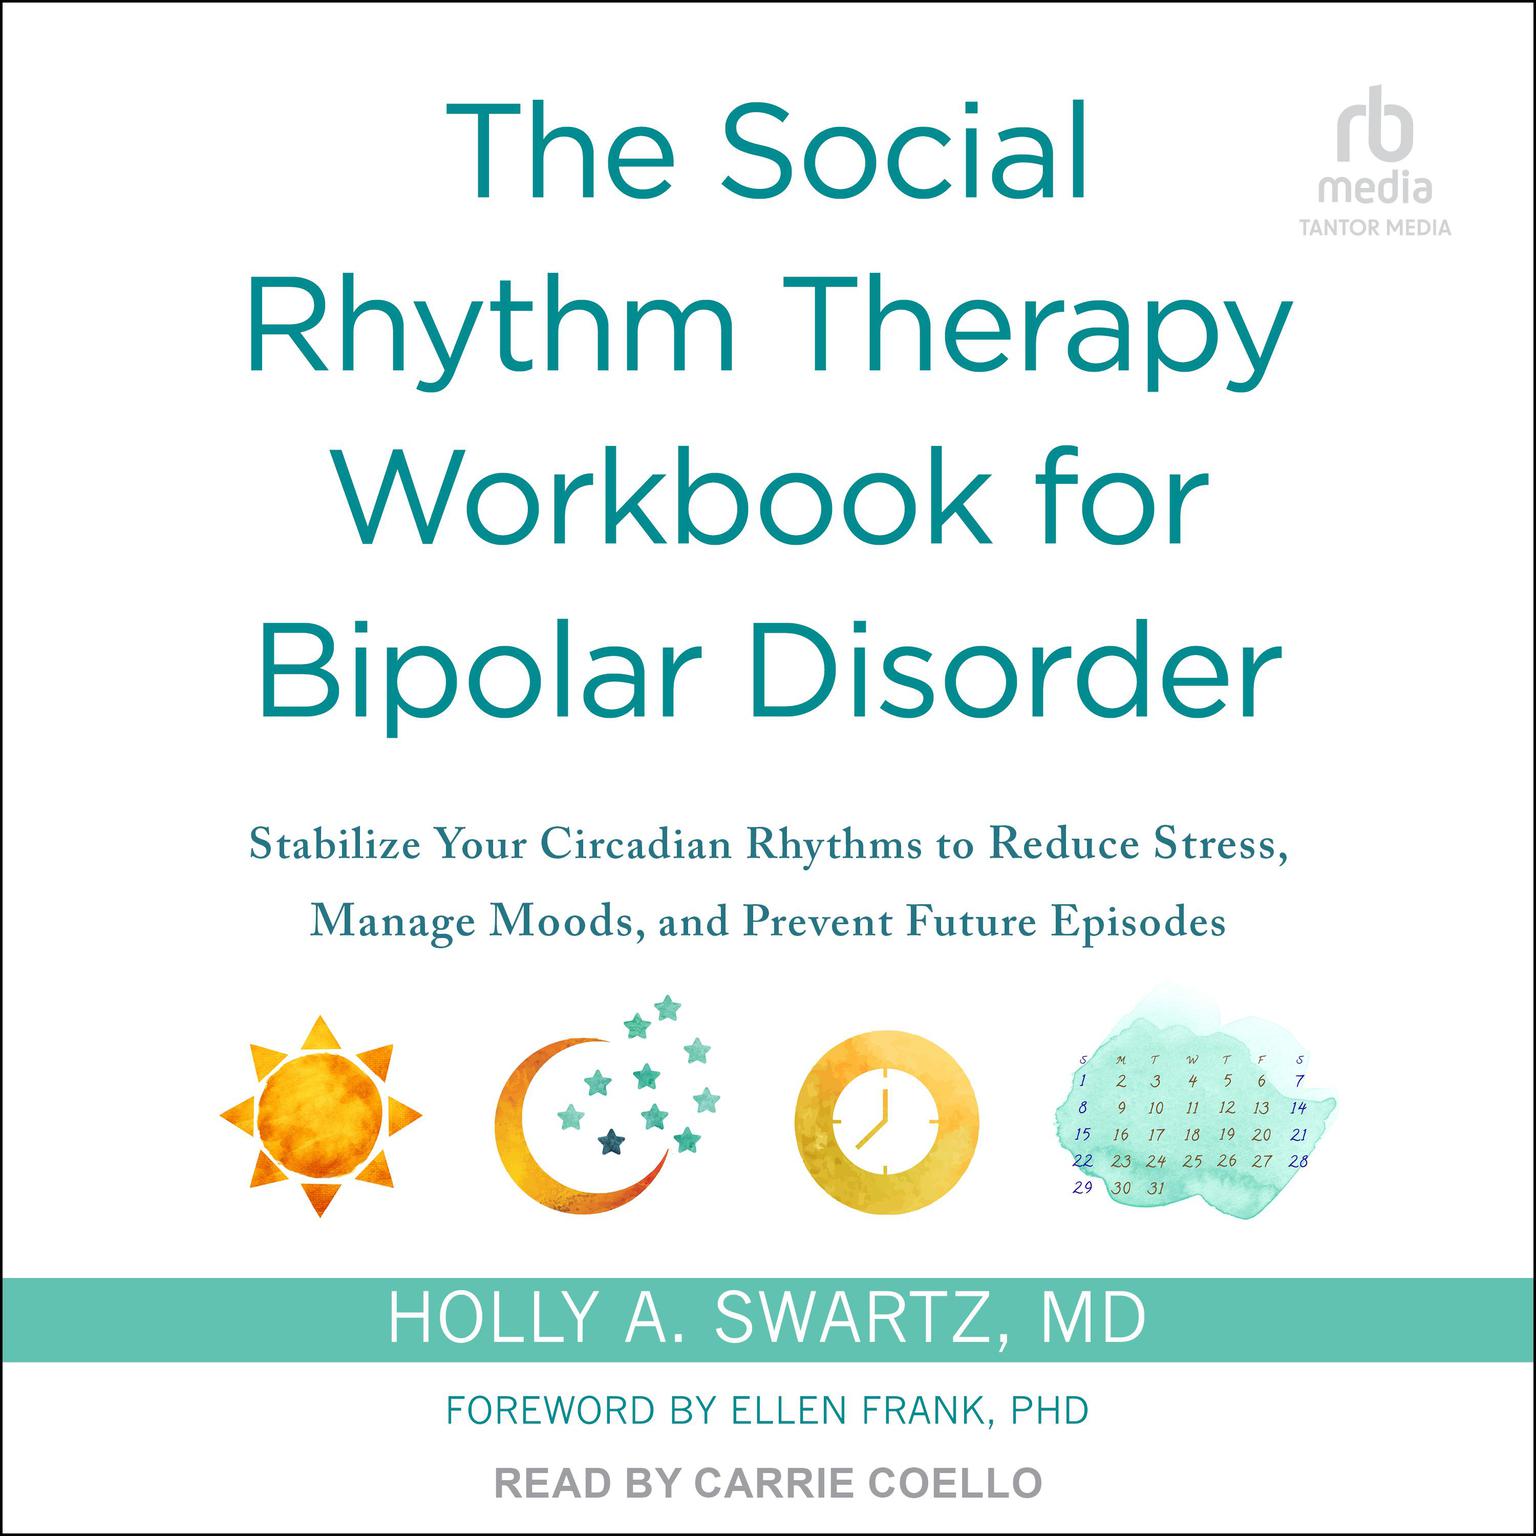 The Social Rhythm Therapy Workbook for Bipolar Disorder: Stabilize Your Circadian Rhythms to Reduce Stress, Manage Moods, and Prevent Future Episodes Audiobook, by Holly A. Swartz